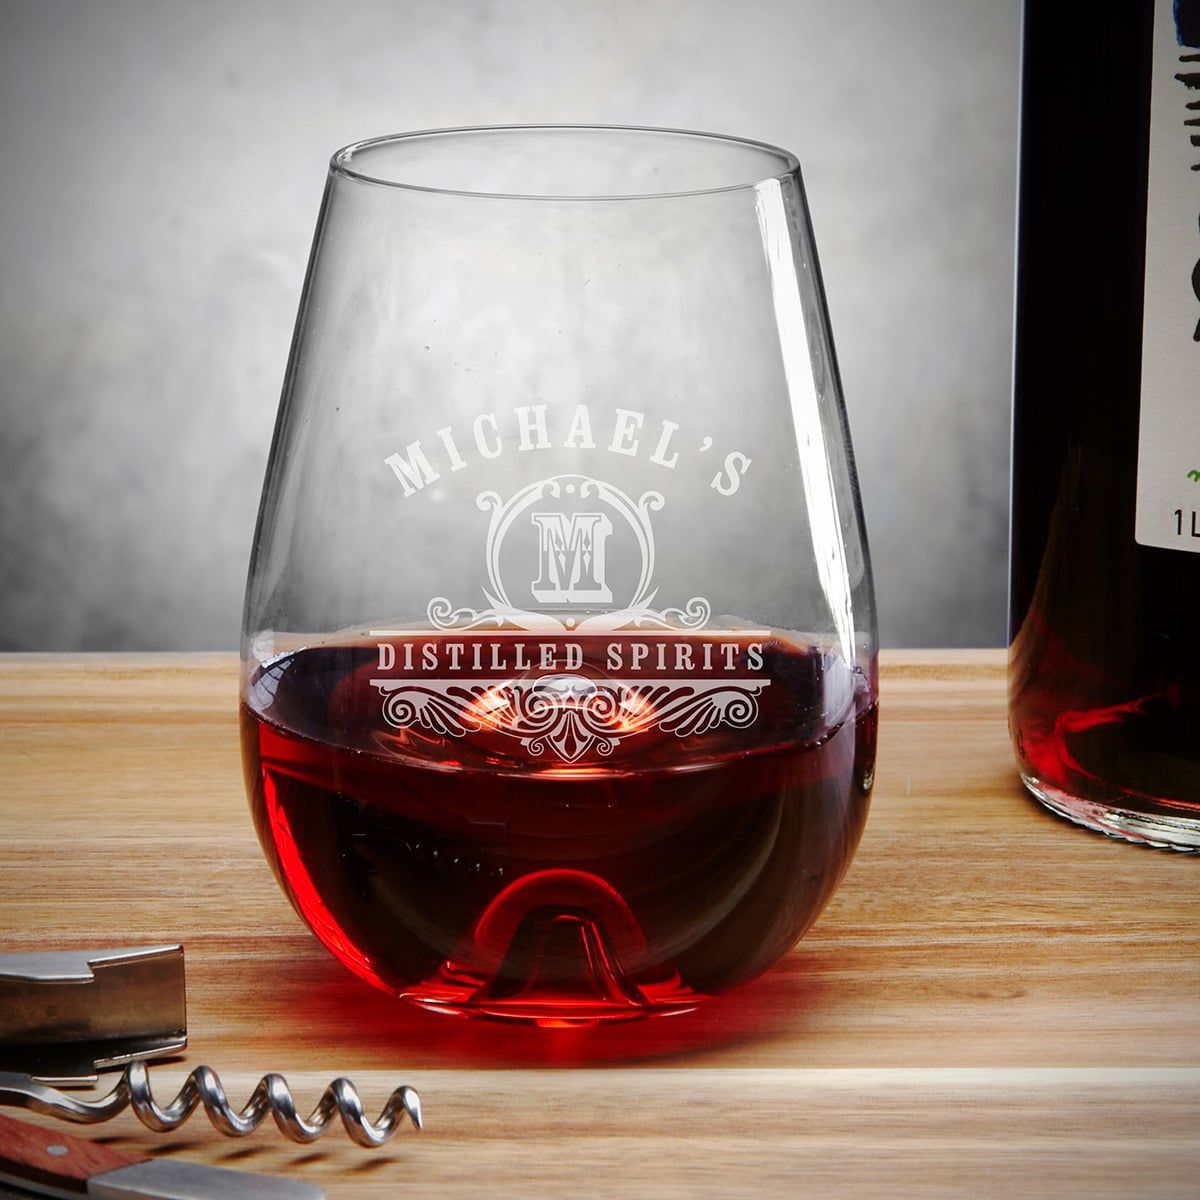 https://images.homewetbar.com/media/catalog/product/s/t/stolze-aerating-stemless-wine-glass-carraway-p-10866.jpg?store=default&image-type=image